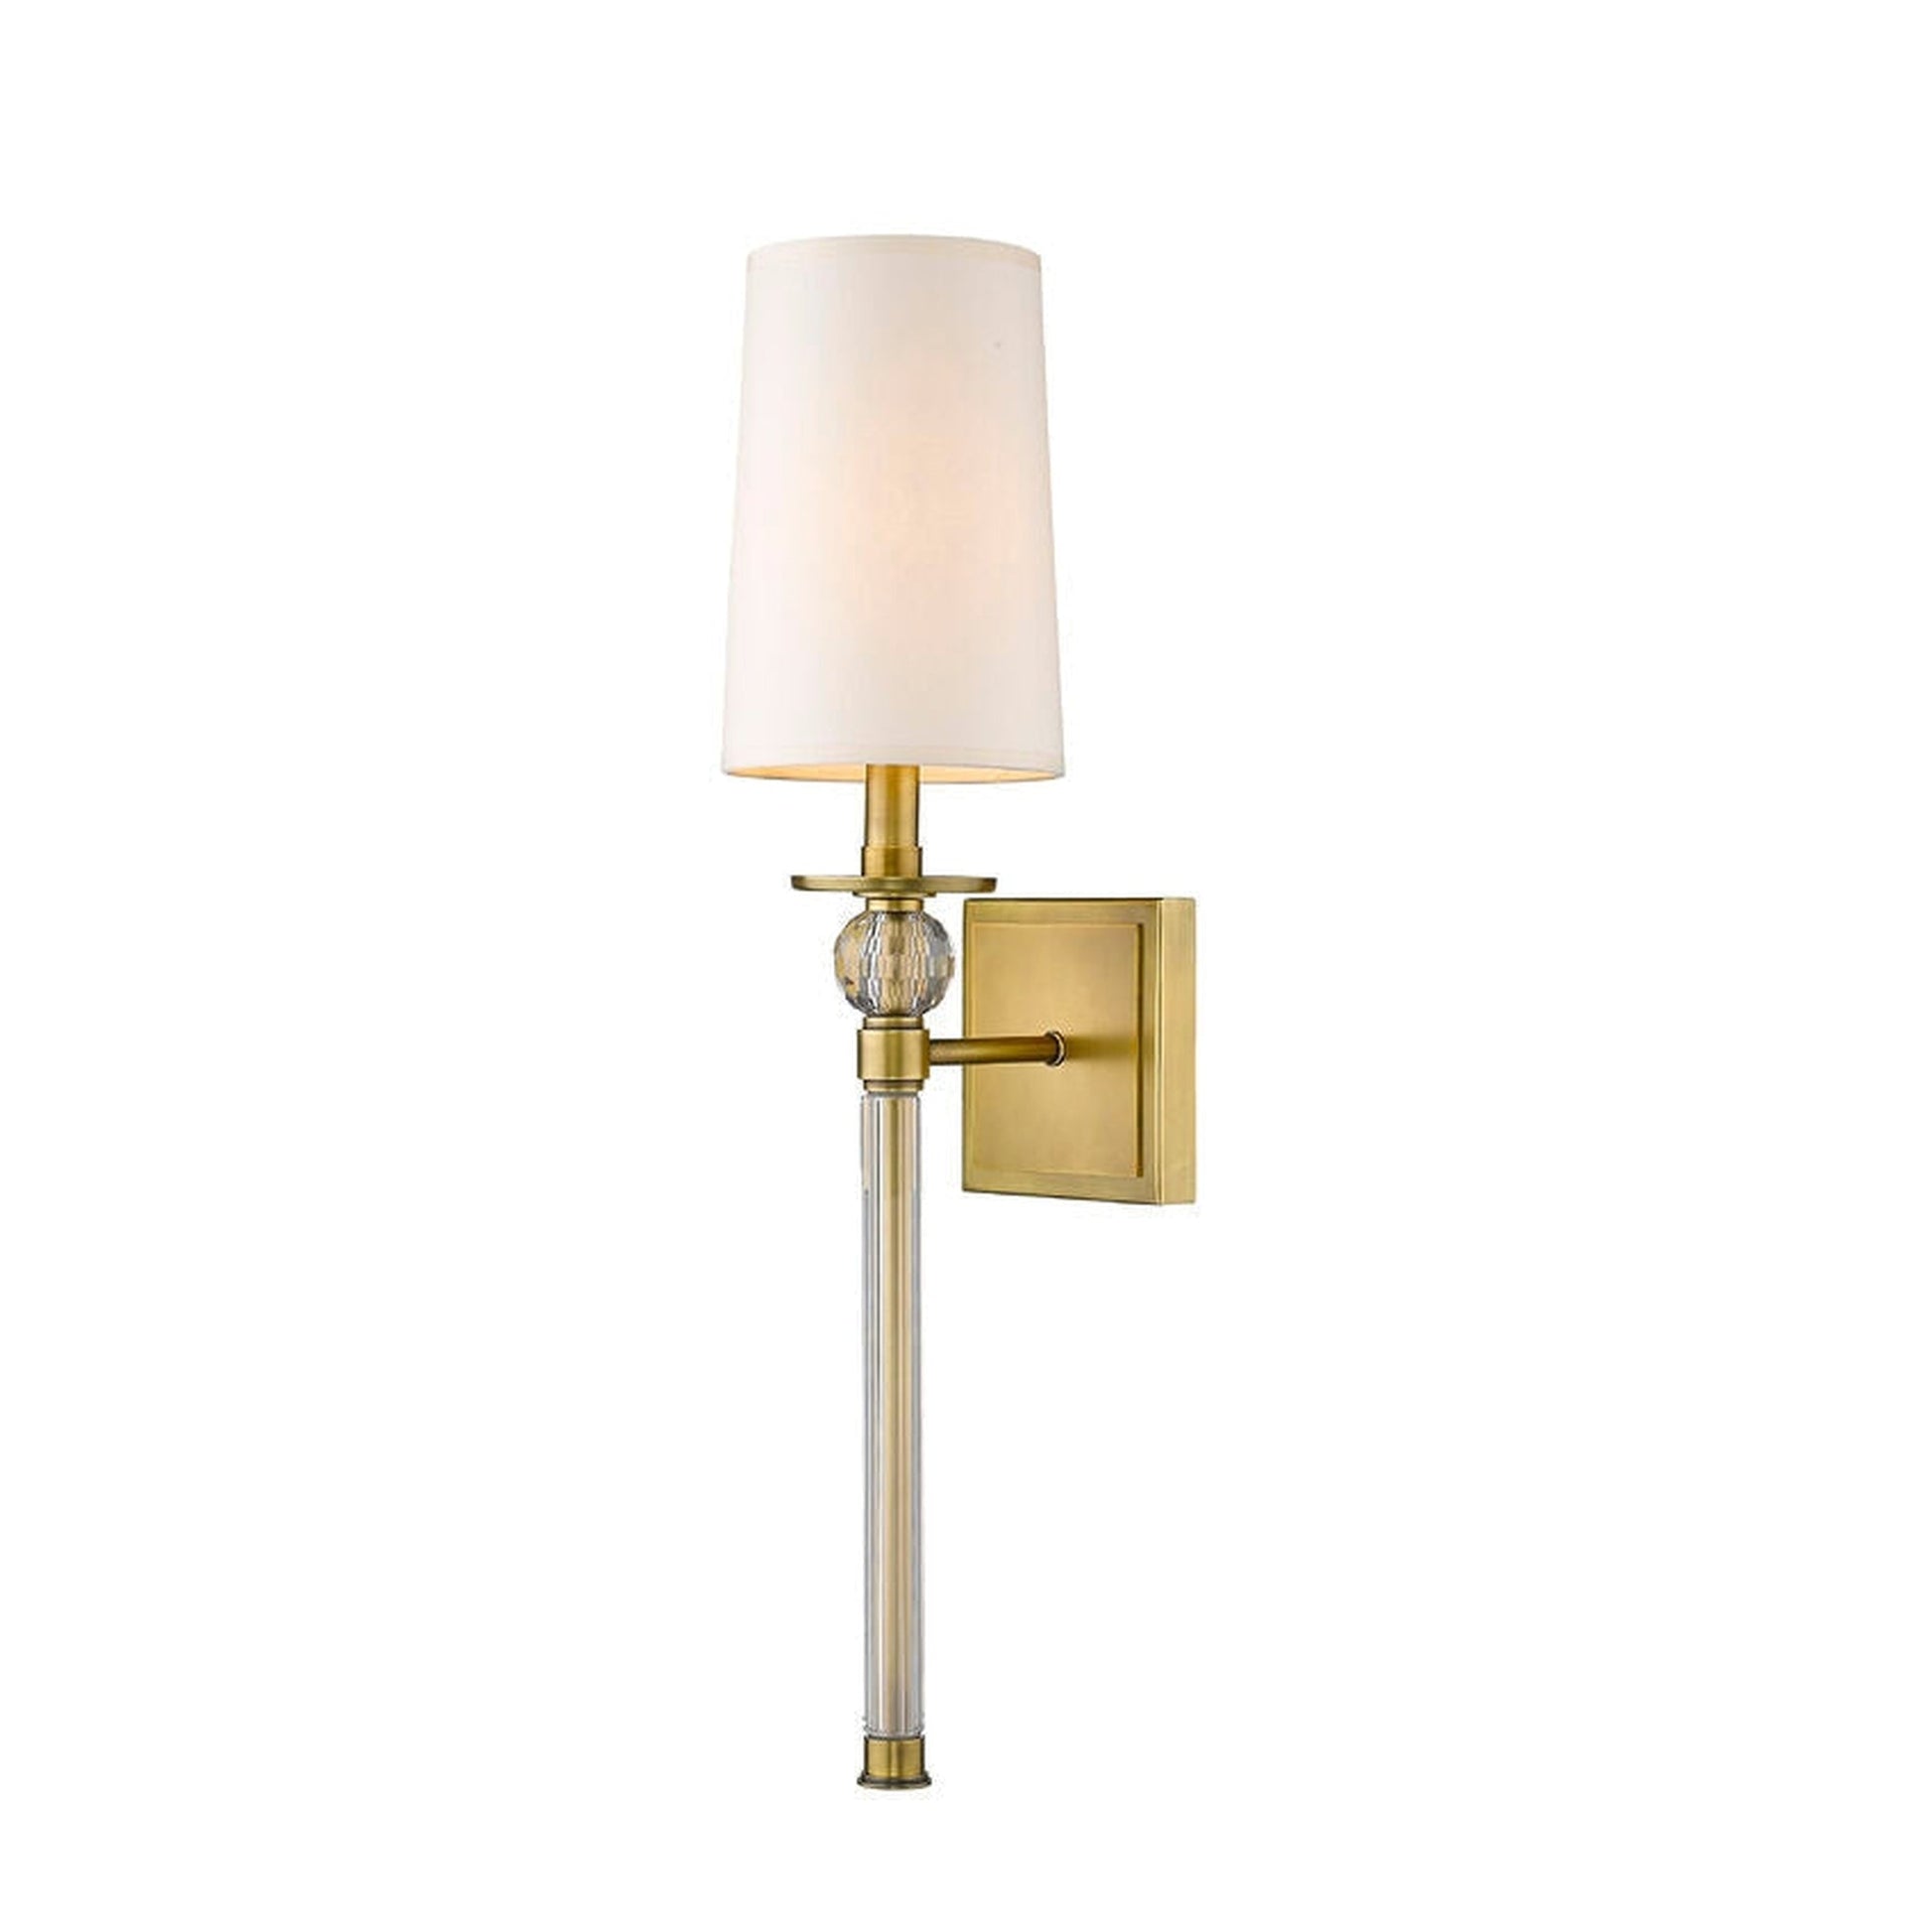 Z-Lite Mia 6" 1-Light Rubbed Brass Wall Sconce With Beige Parchment Paper Shade